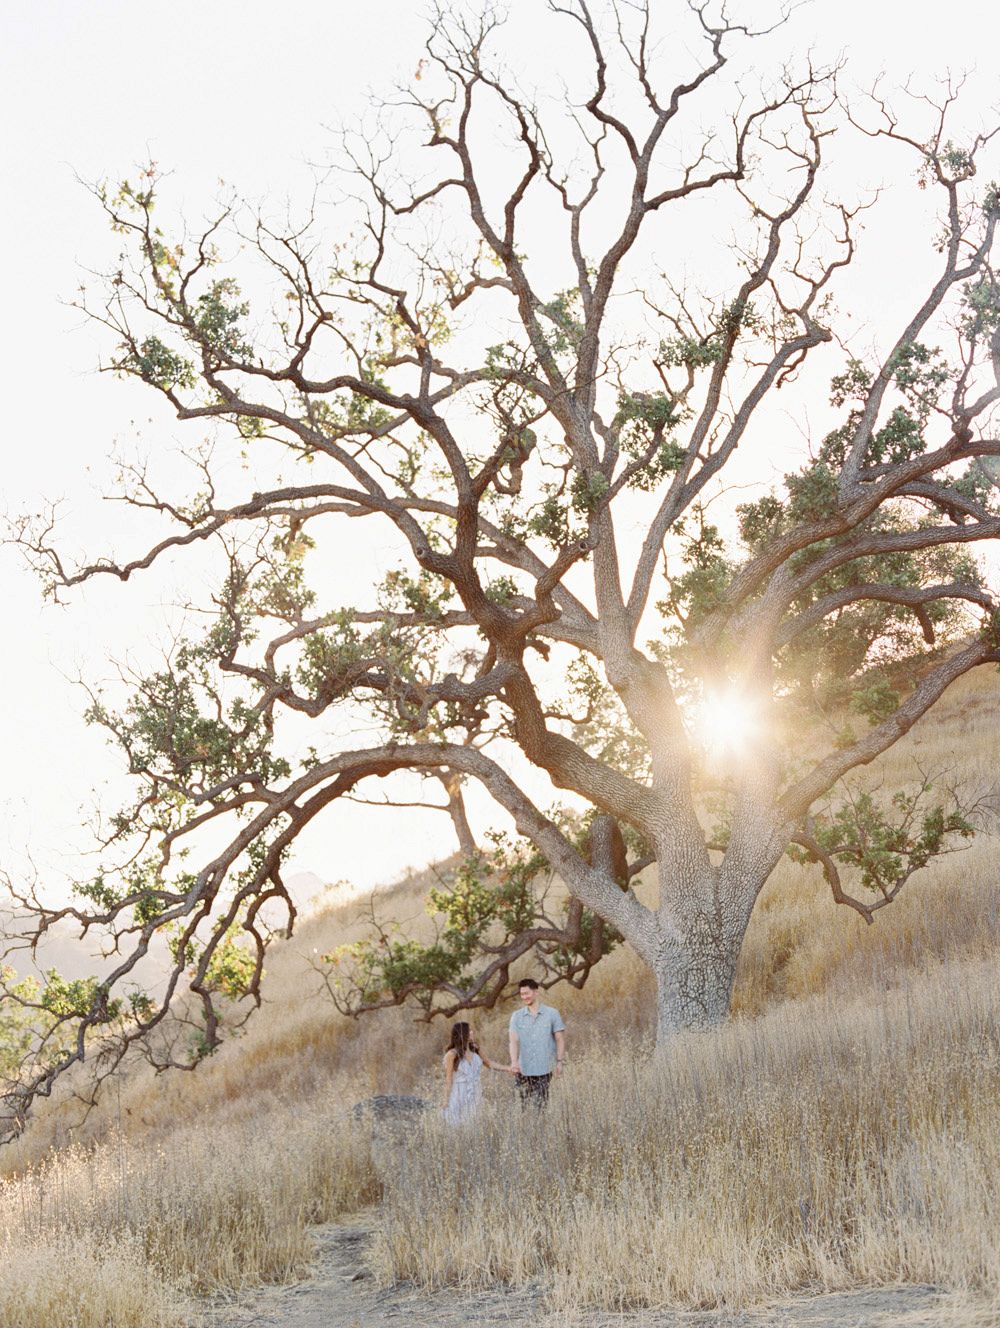 Bethany and Enbo's Southern California Engagement